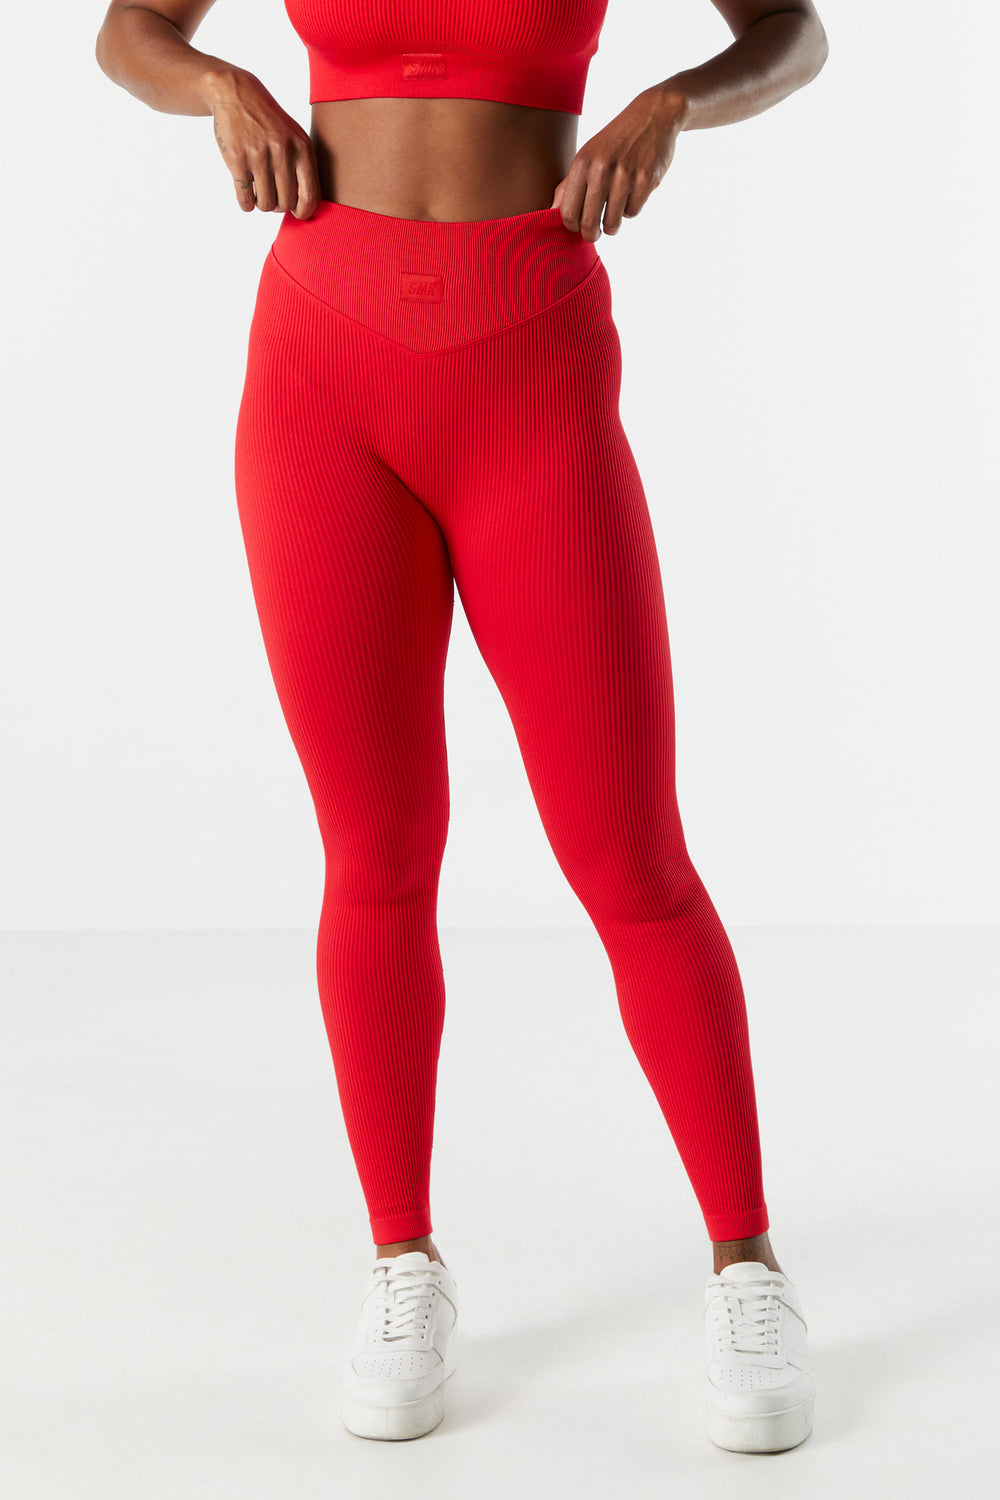 Sommer Ray Seamless Ribbed Active Legging Sommer Ray Seamless Ribbed Active Legging 2